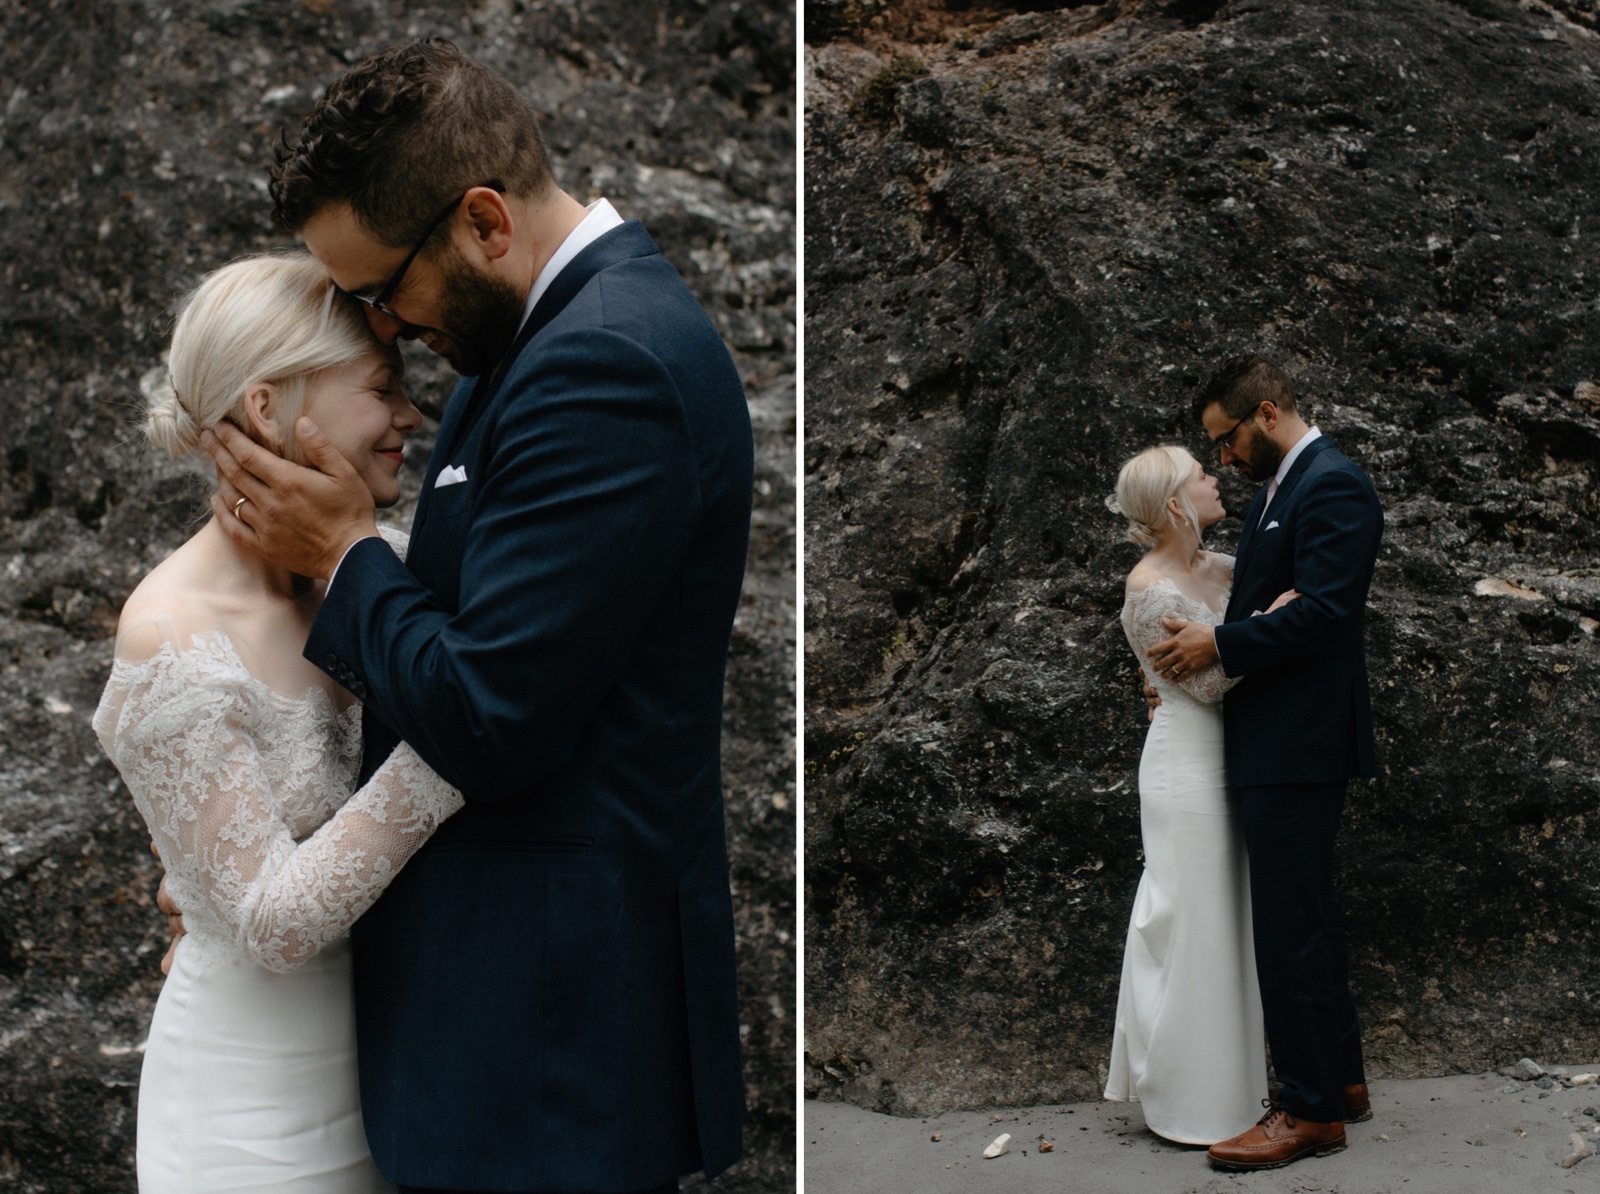 Intimate wedding portraiture with natural skin tones in Banff